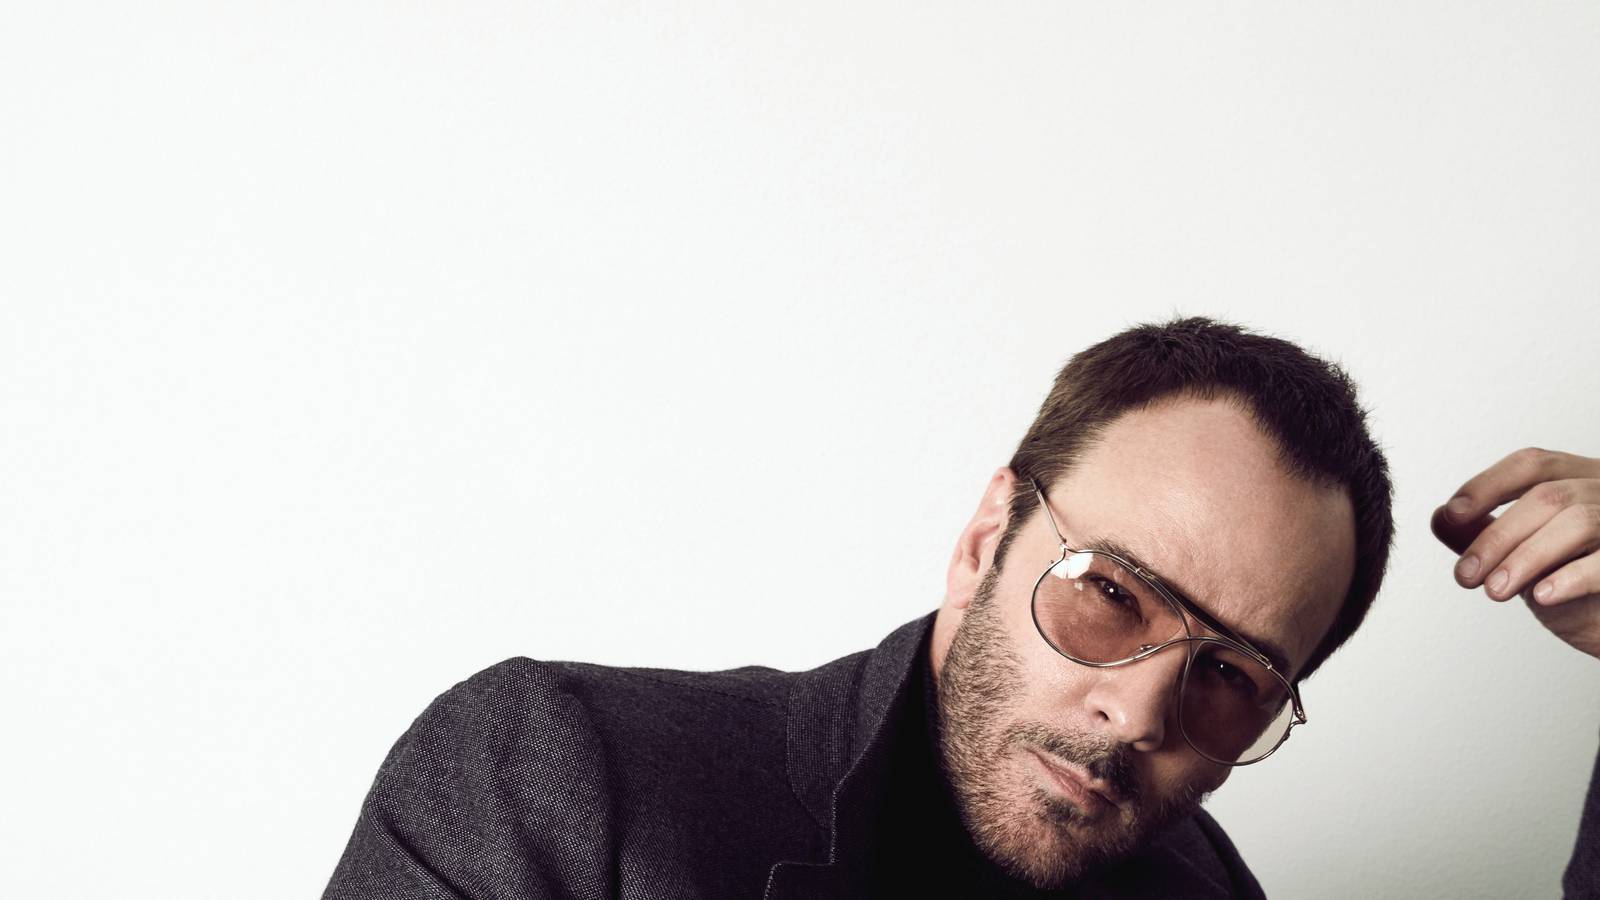 Tom Ford: 'I paid $90,000 for my own dress. The clothes we make